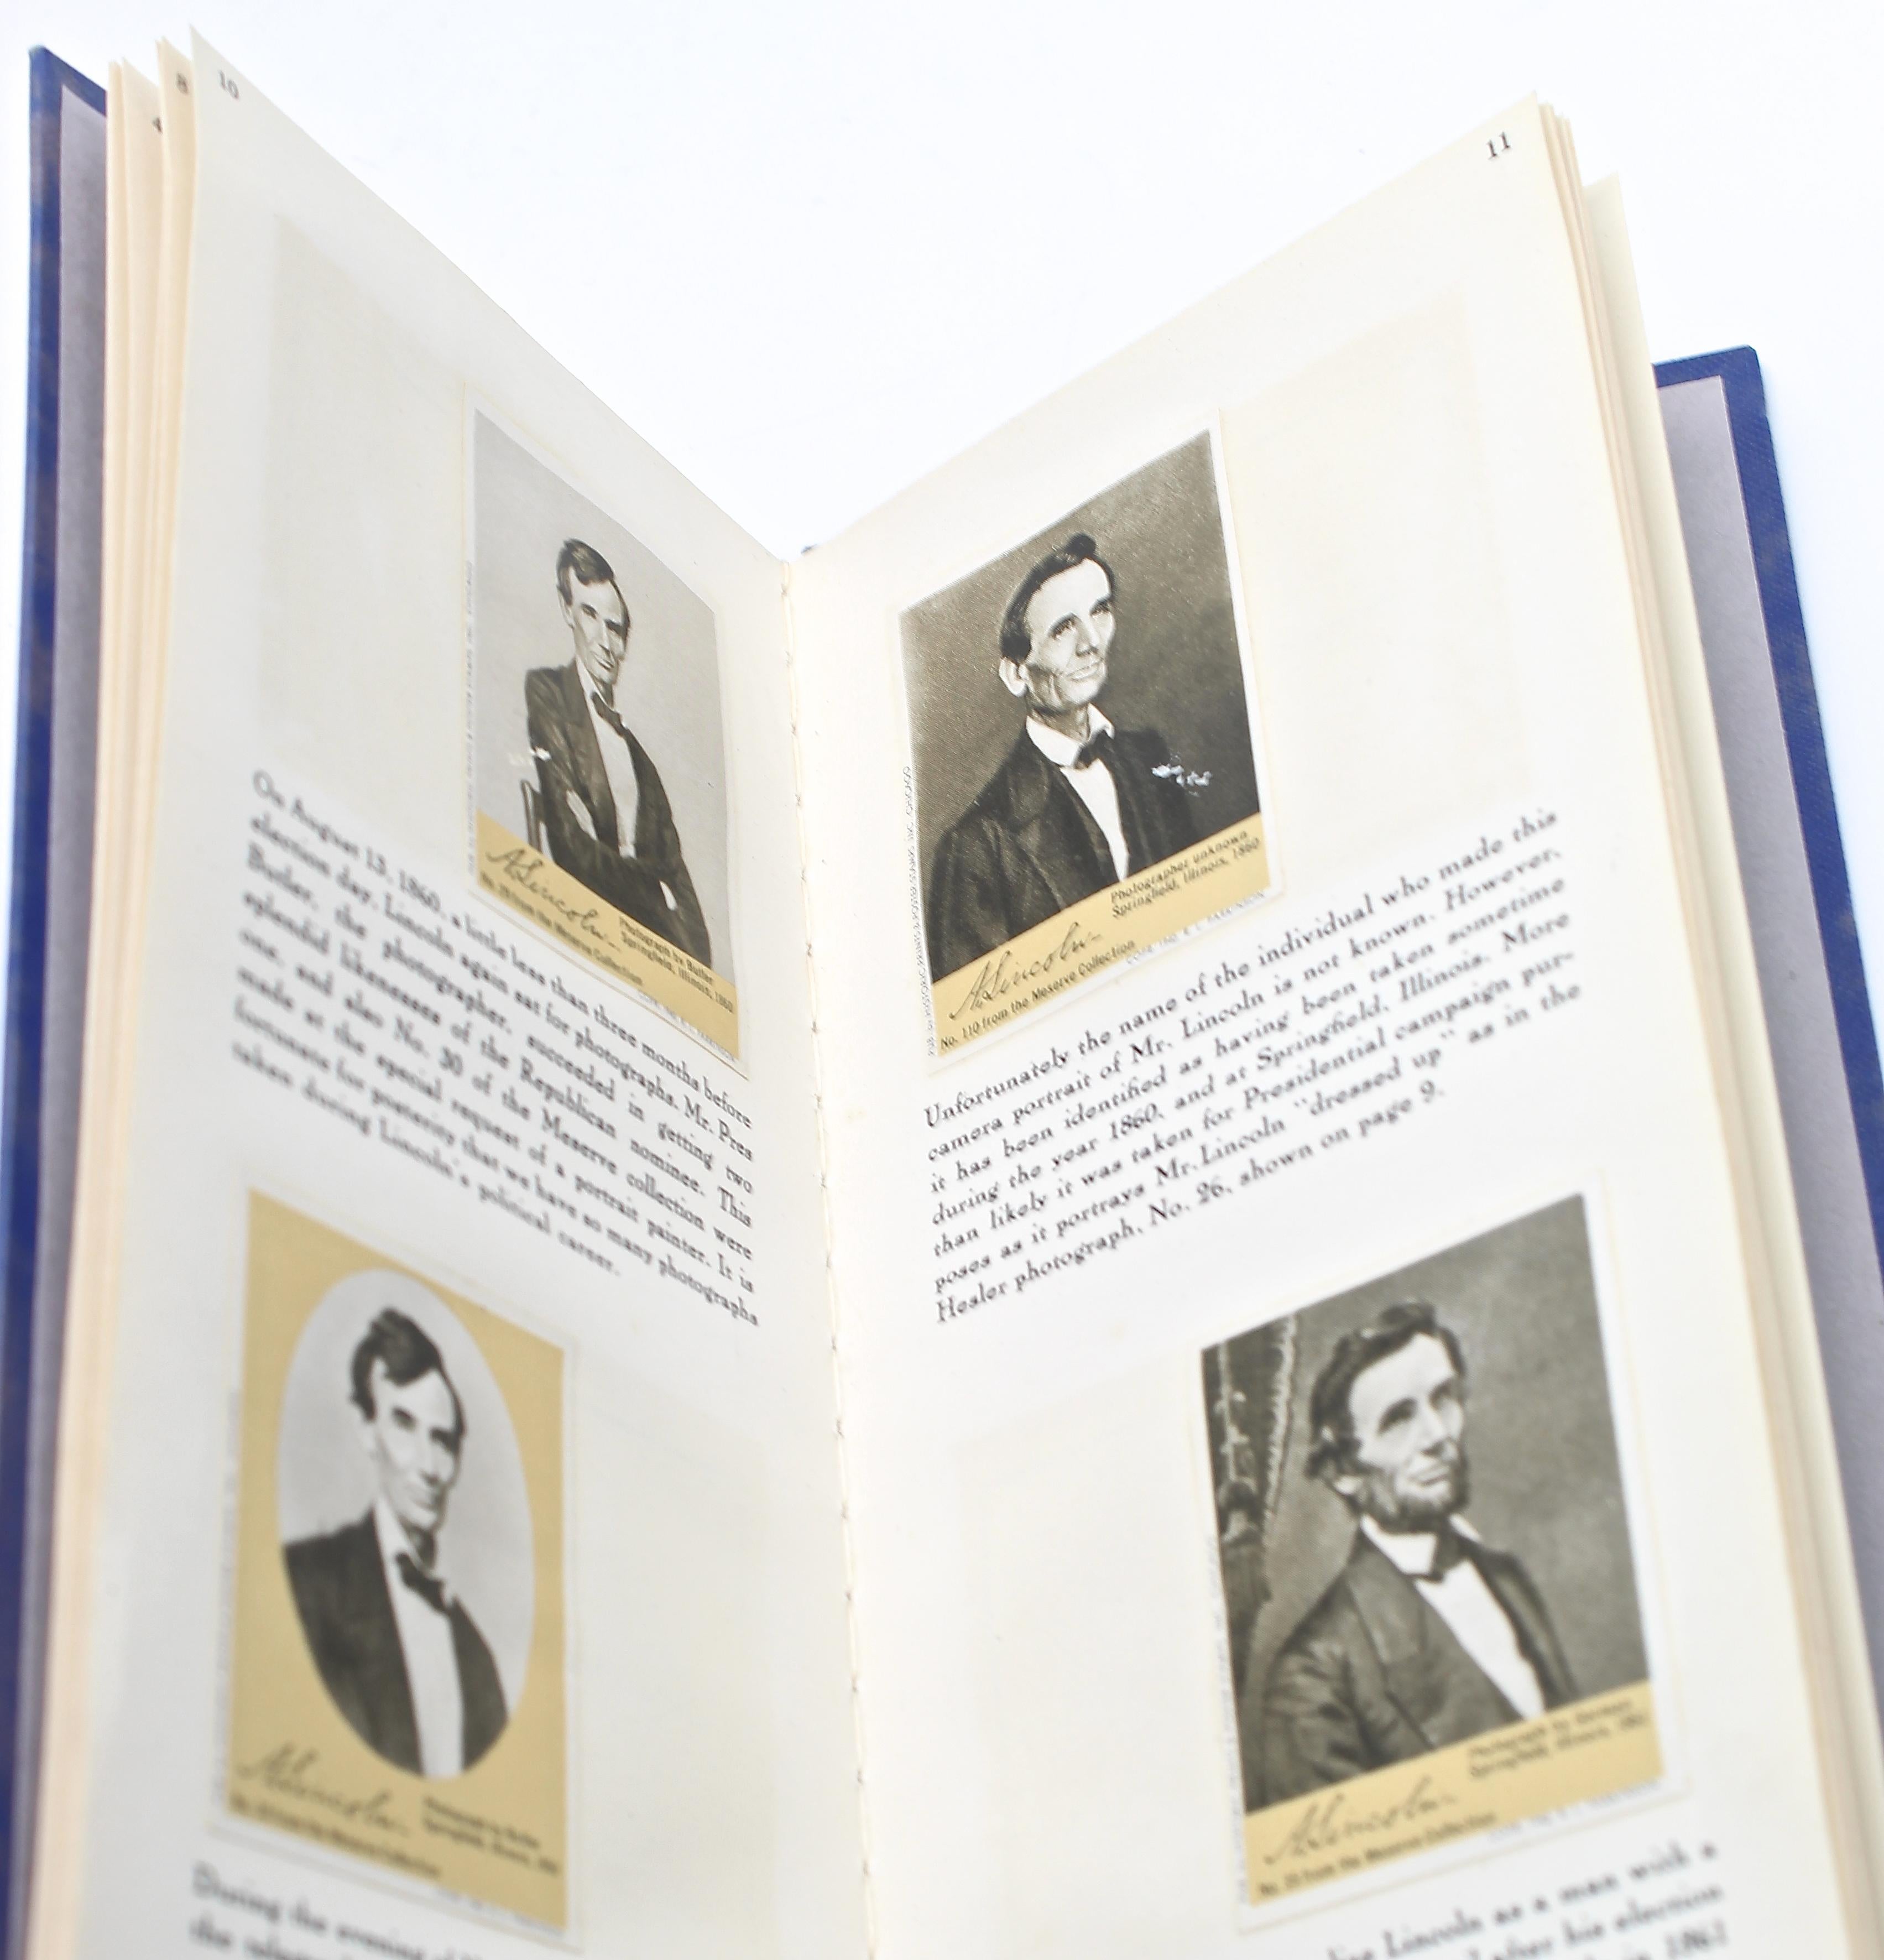 Meserve, Frederick Hill. This is Abraham Lincoln. Harrogate: Lincoln Memorial University City, 1941. Limited edition. Includes 30 tipped-in poster stamps. Bound in publisher's original blue and gray cloth covers, with stamped gilt titles to front.